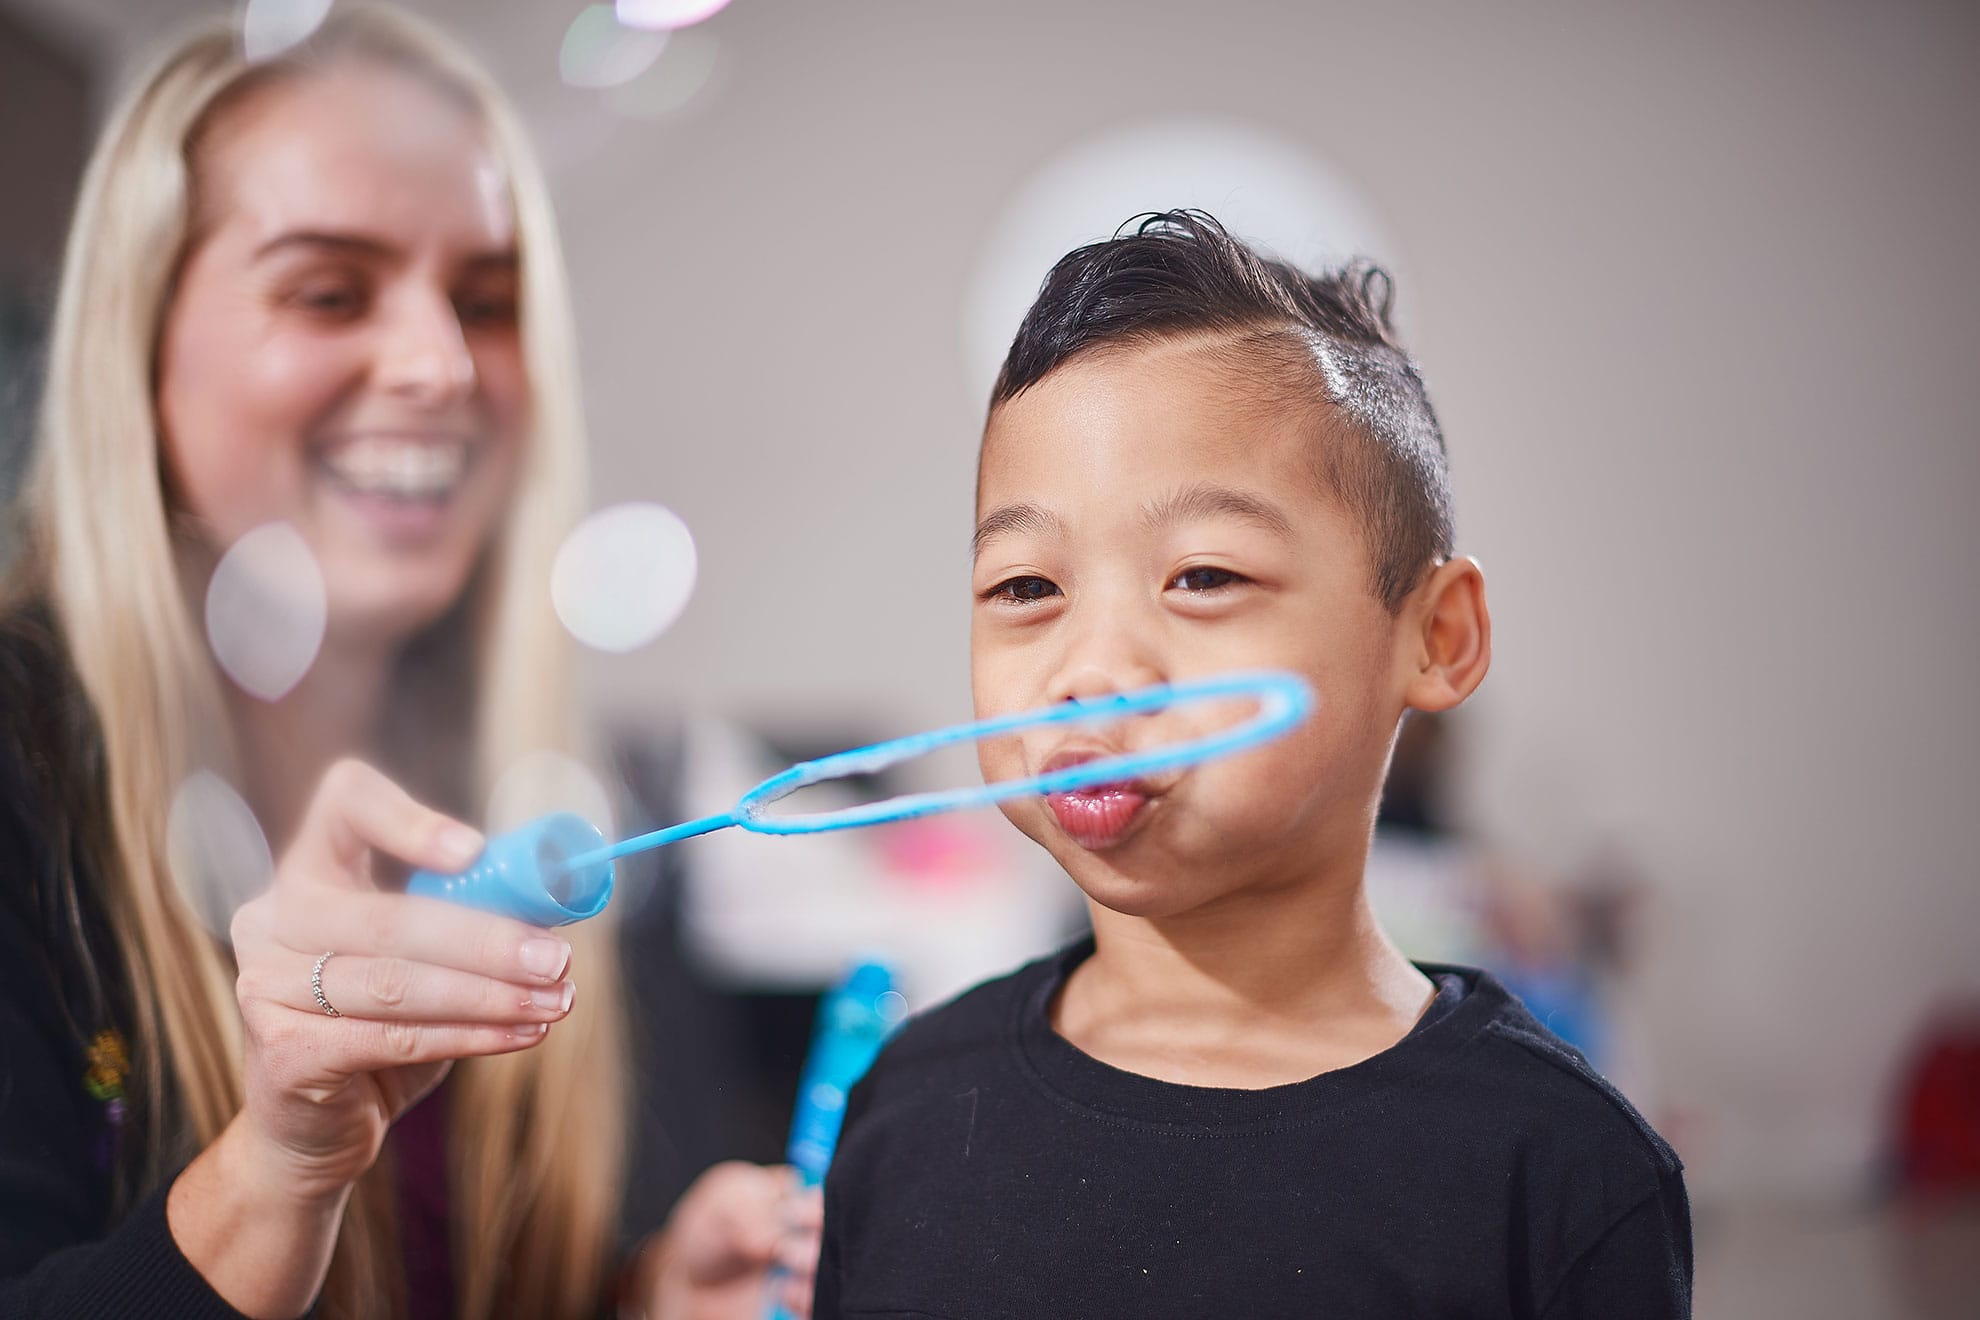 A boy blowing bubbles with a therapist smiling in the background